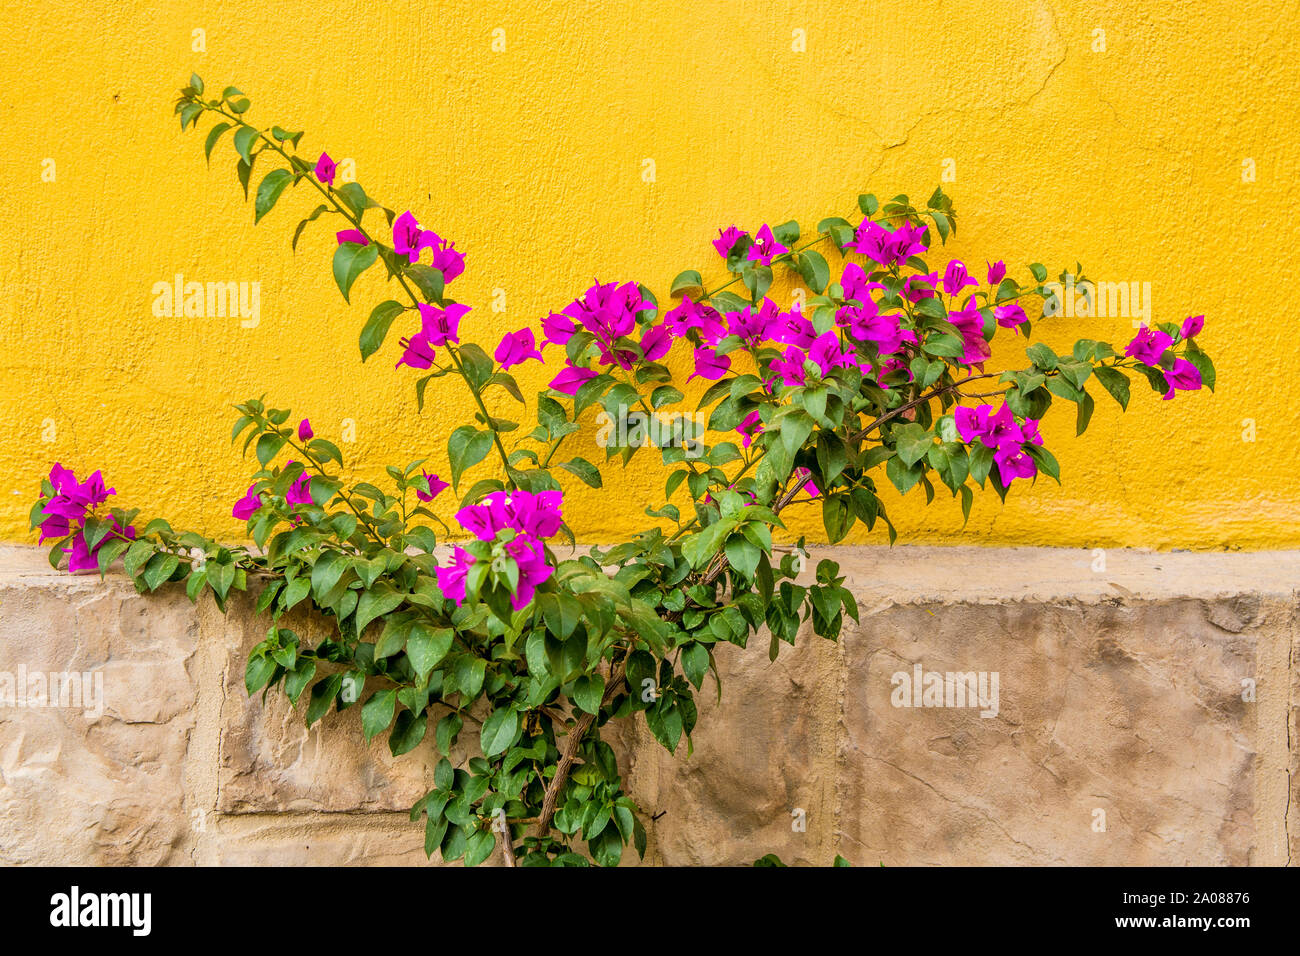 Bougainvillea flowers against yellow wall in Tlaquepaque, near Guadalajara, Jalisco, Mexico. Stock Photo